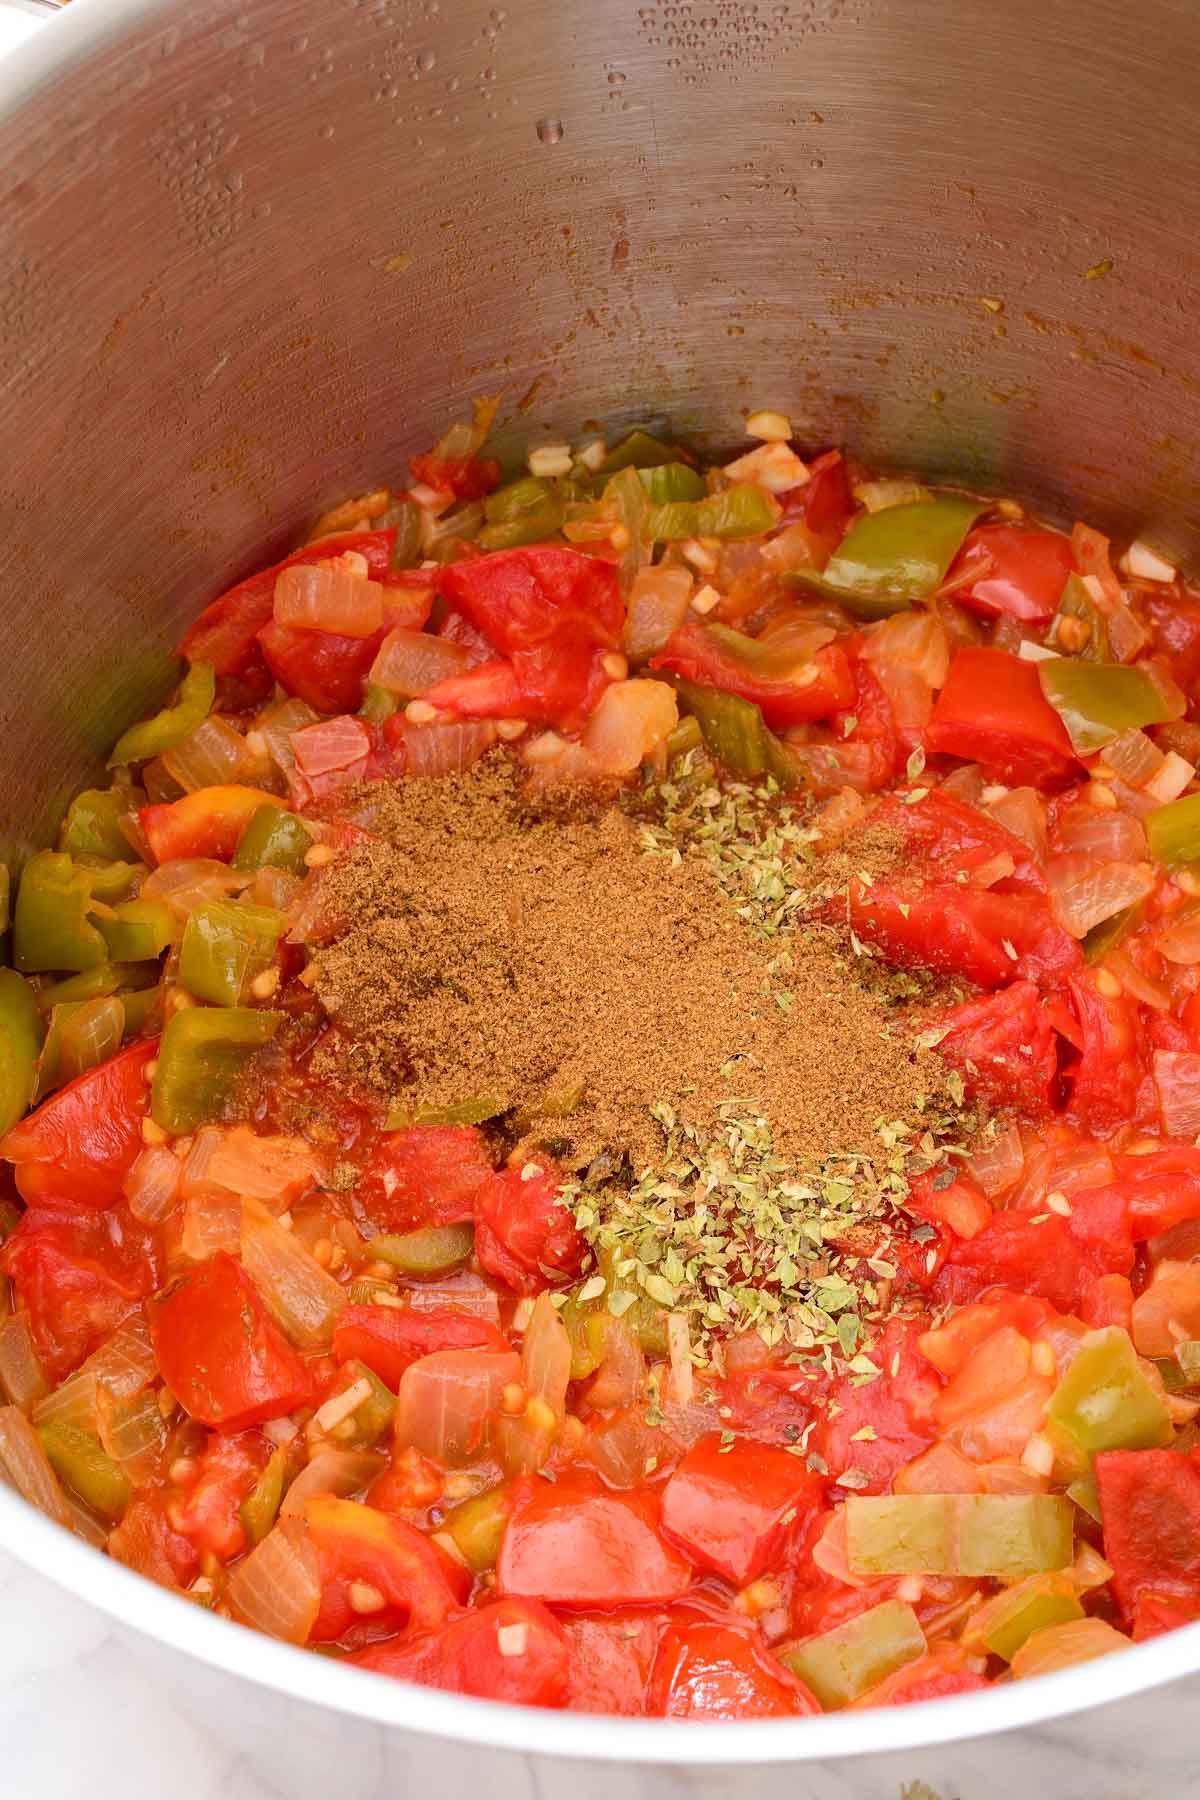 The sofrito inside the pot with cumin and oregano on top.